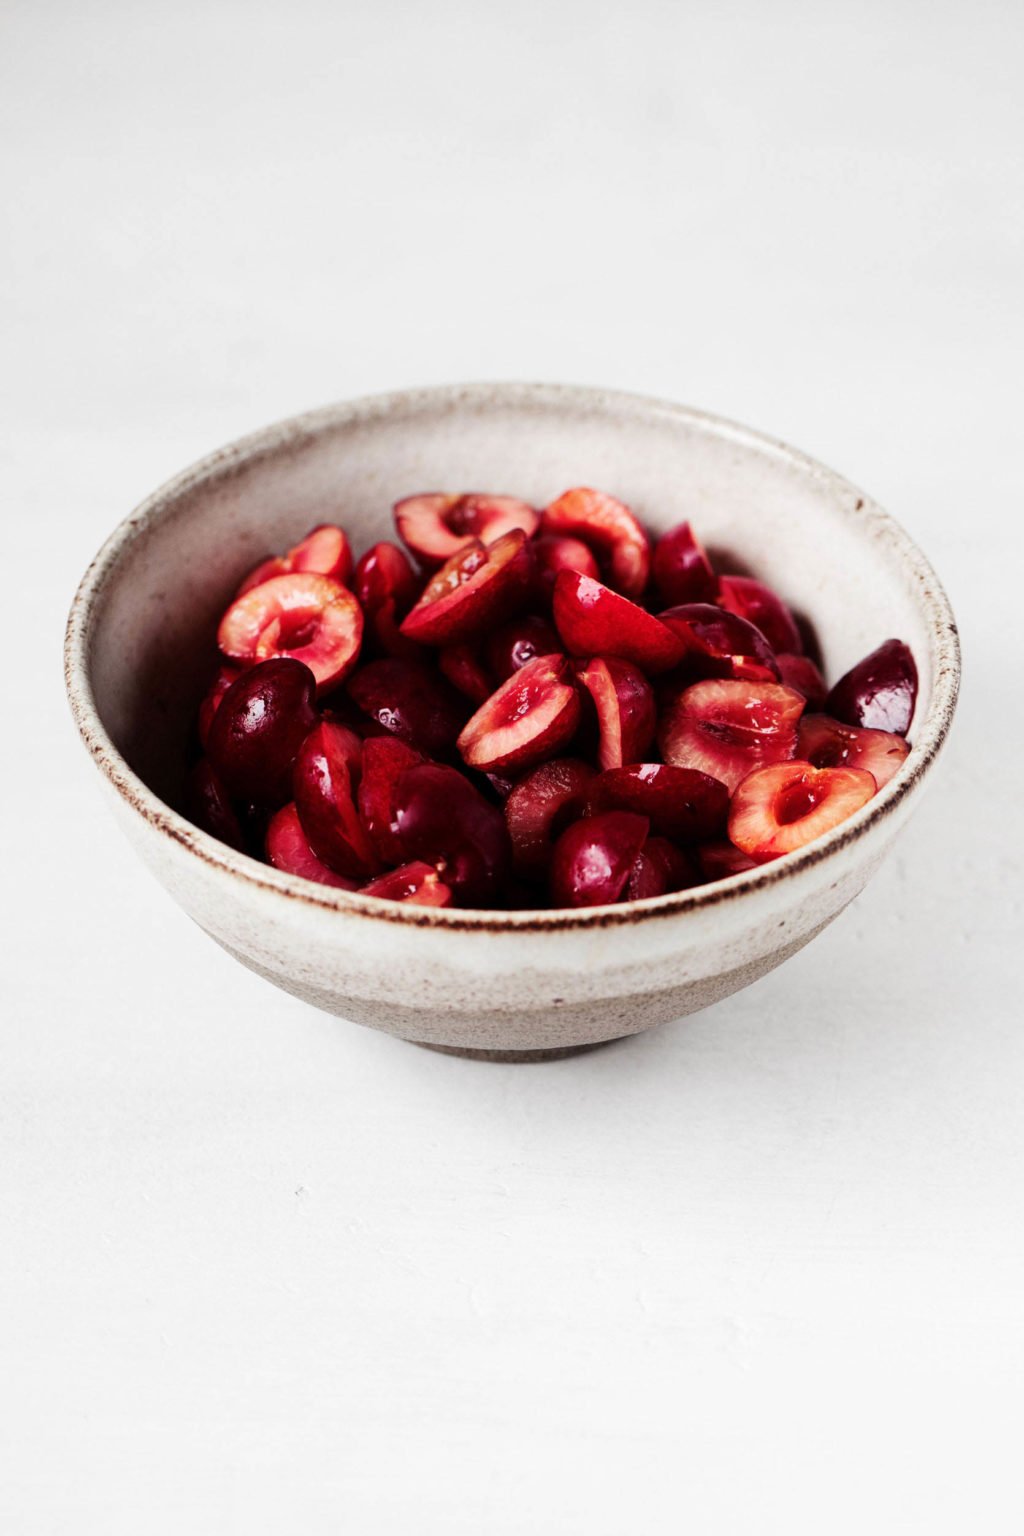 A white, ceramic bowl is resting on a white surface. It contains bright red, fresh fruit.